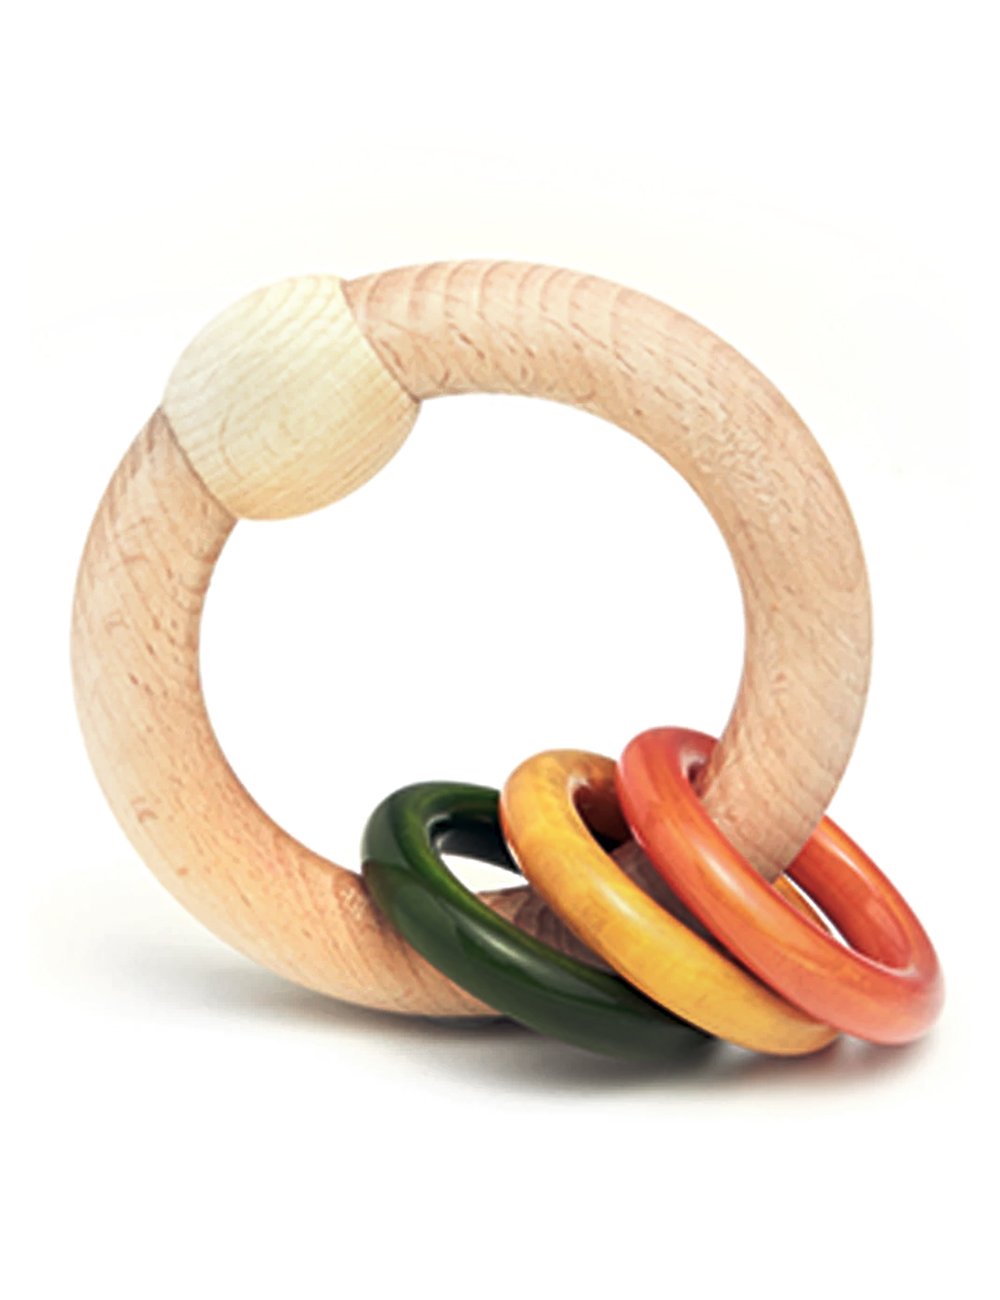 Wooden Rattle - Circular Colored